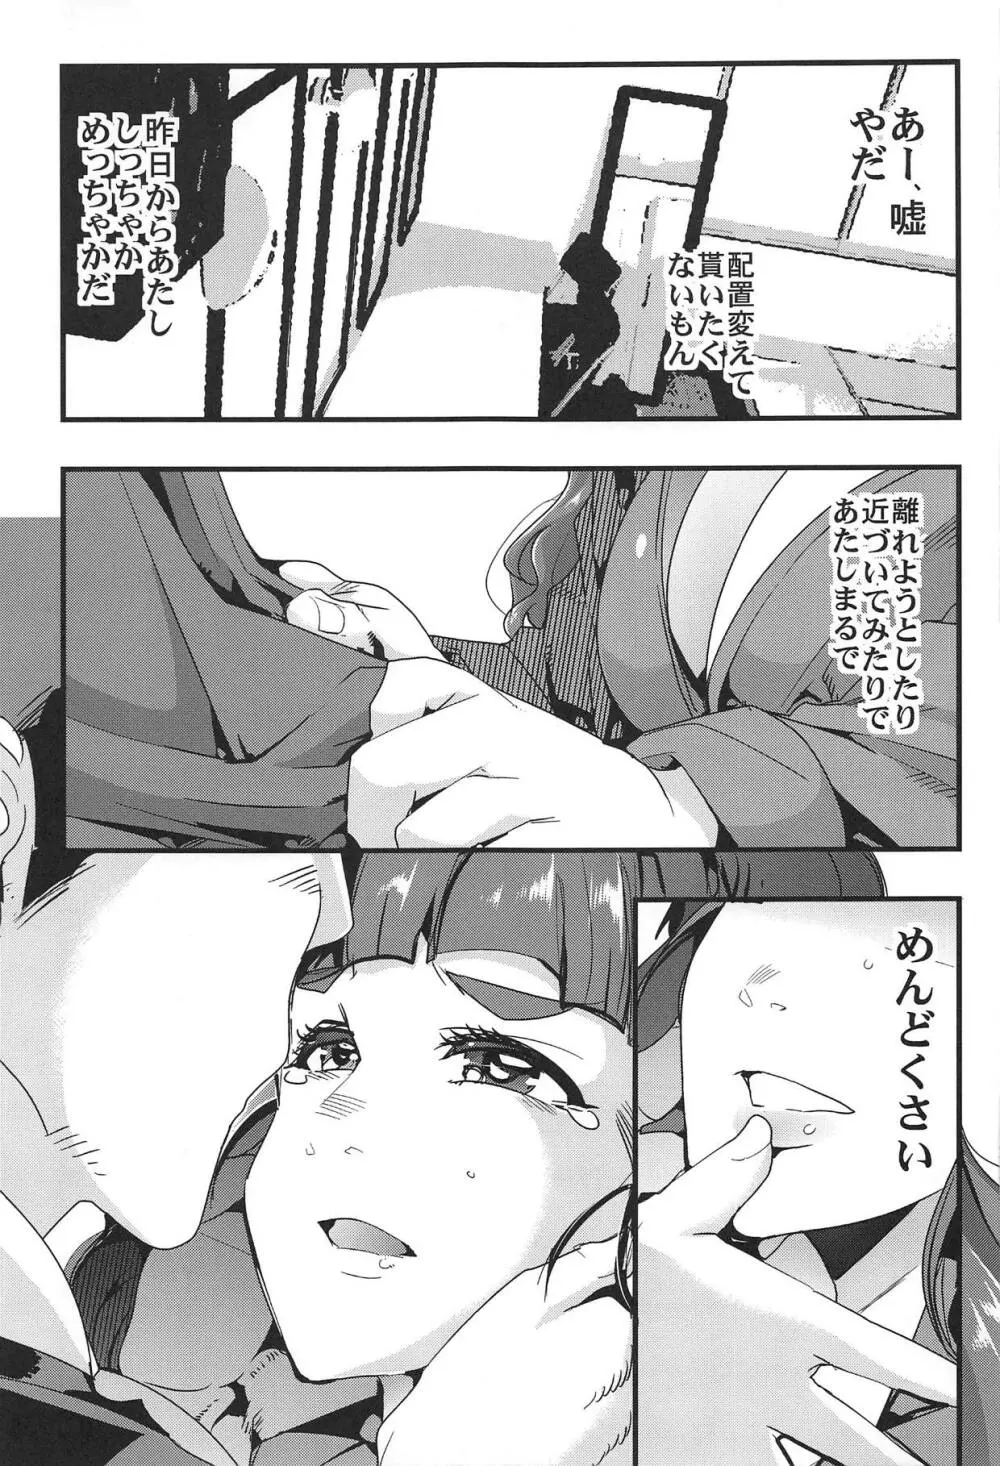 ALL TIME CINDERELLA 神谷奈緒 - page12